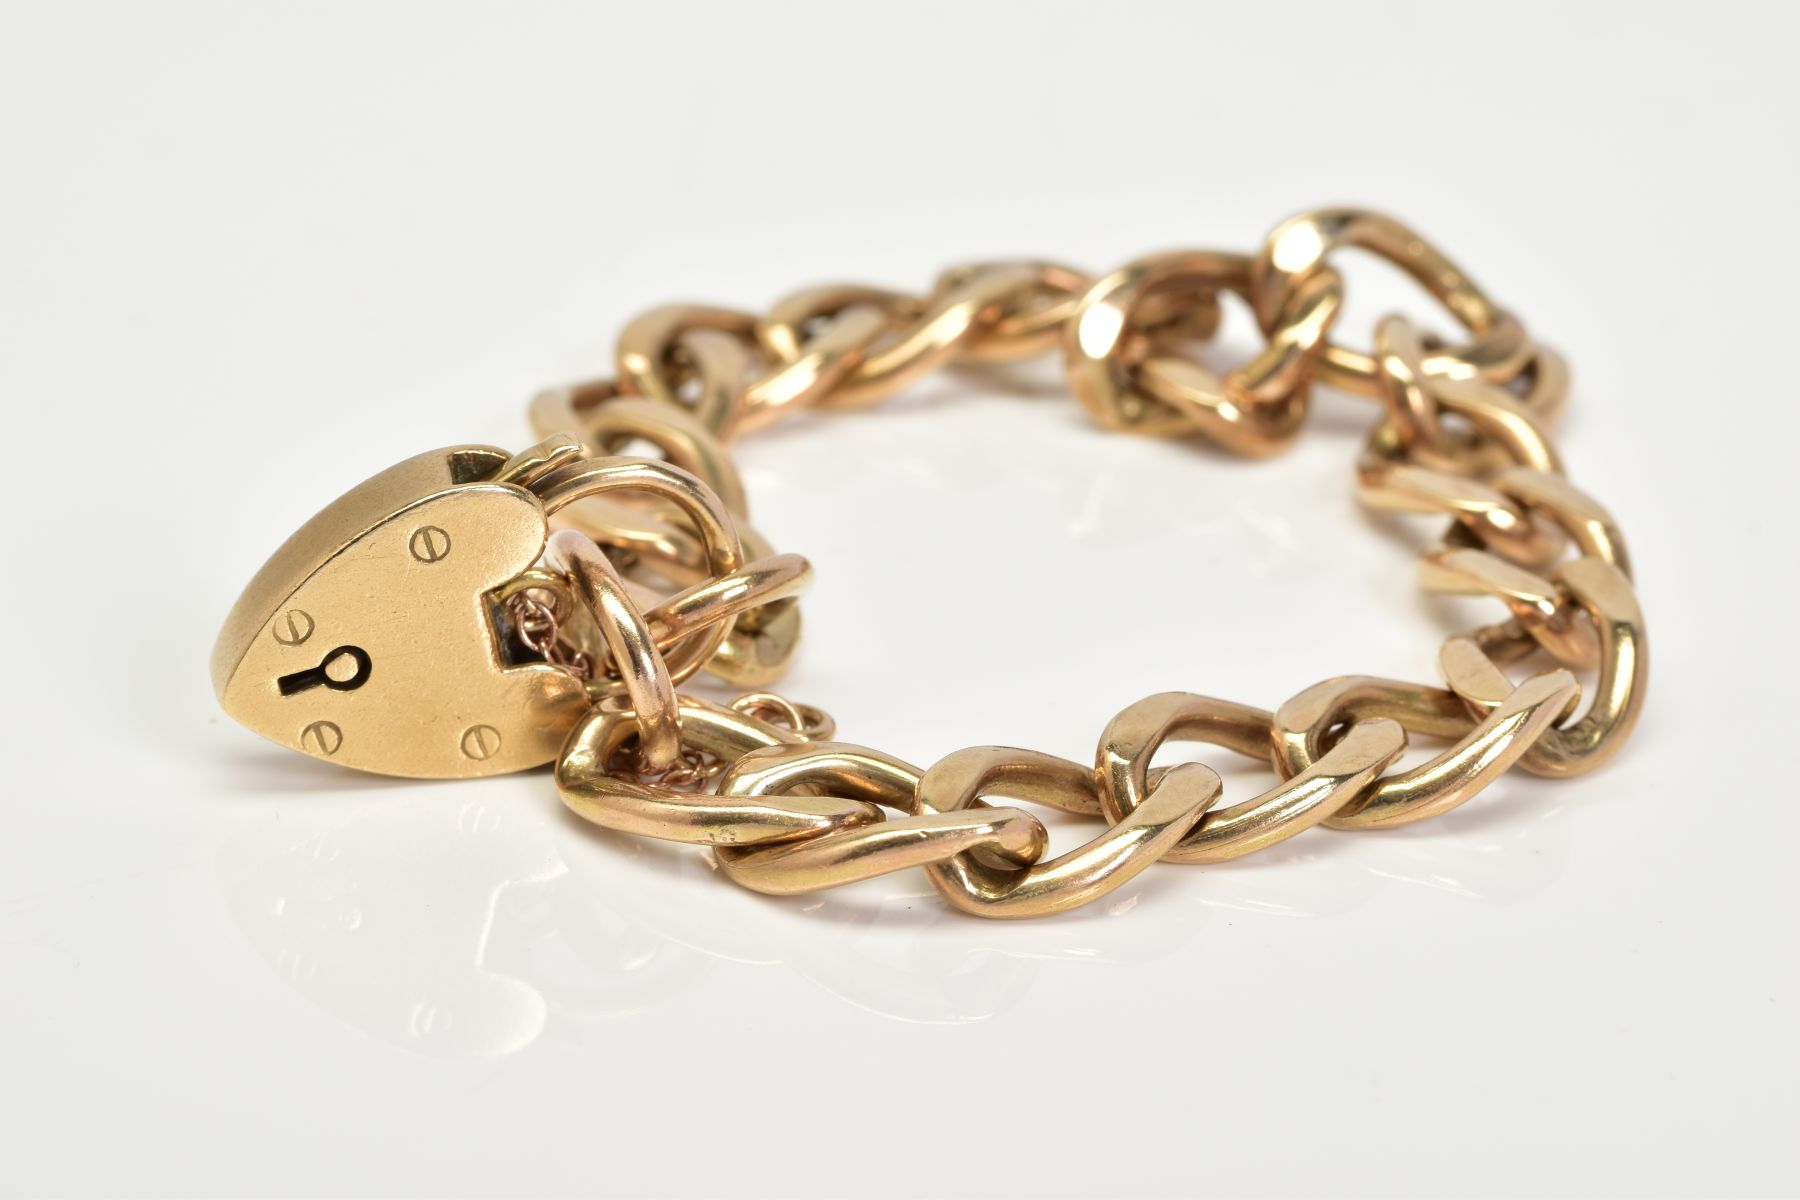 A 9CT GOLD CHARM BRACELET, of curb link design with each link stamped 3.975, to a heart clasp with a